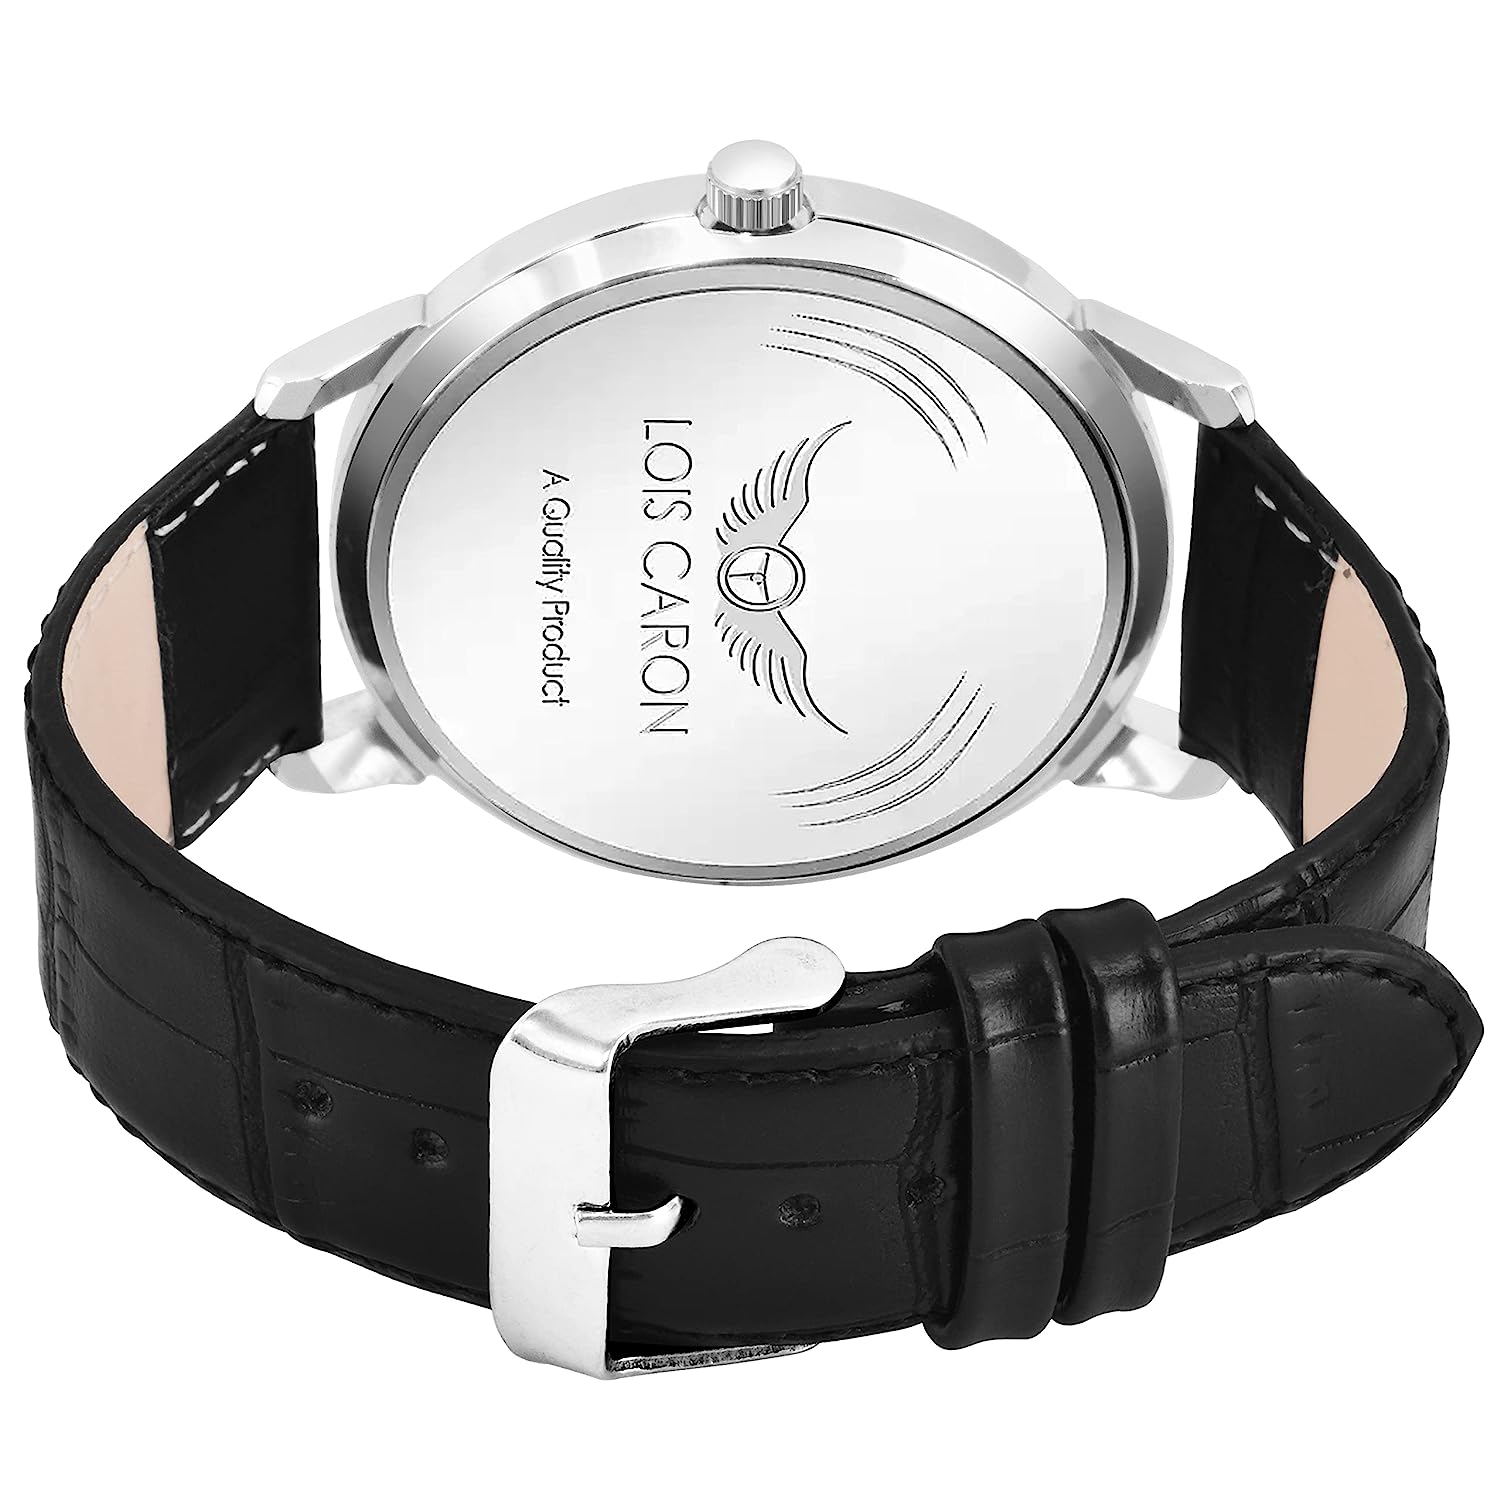 LOIS CARON Ultra Slim Series Black Dial & Black Leather Strap for Boys Analog Watch - for Men LCS-4254